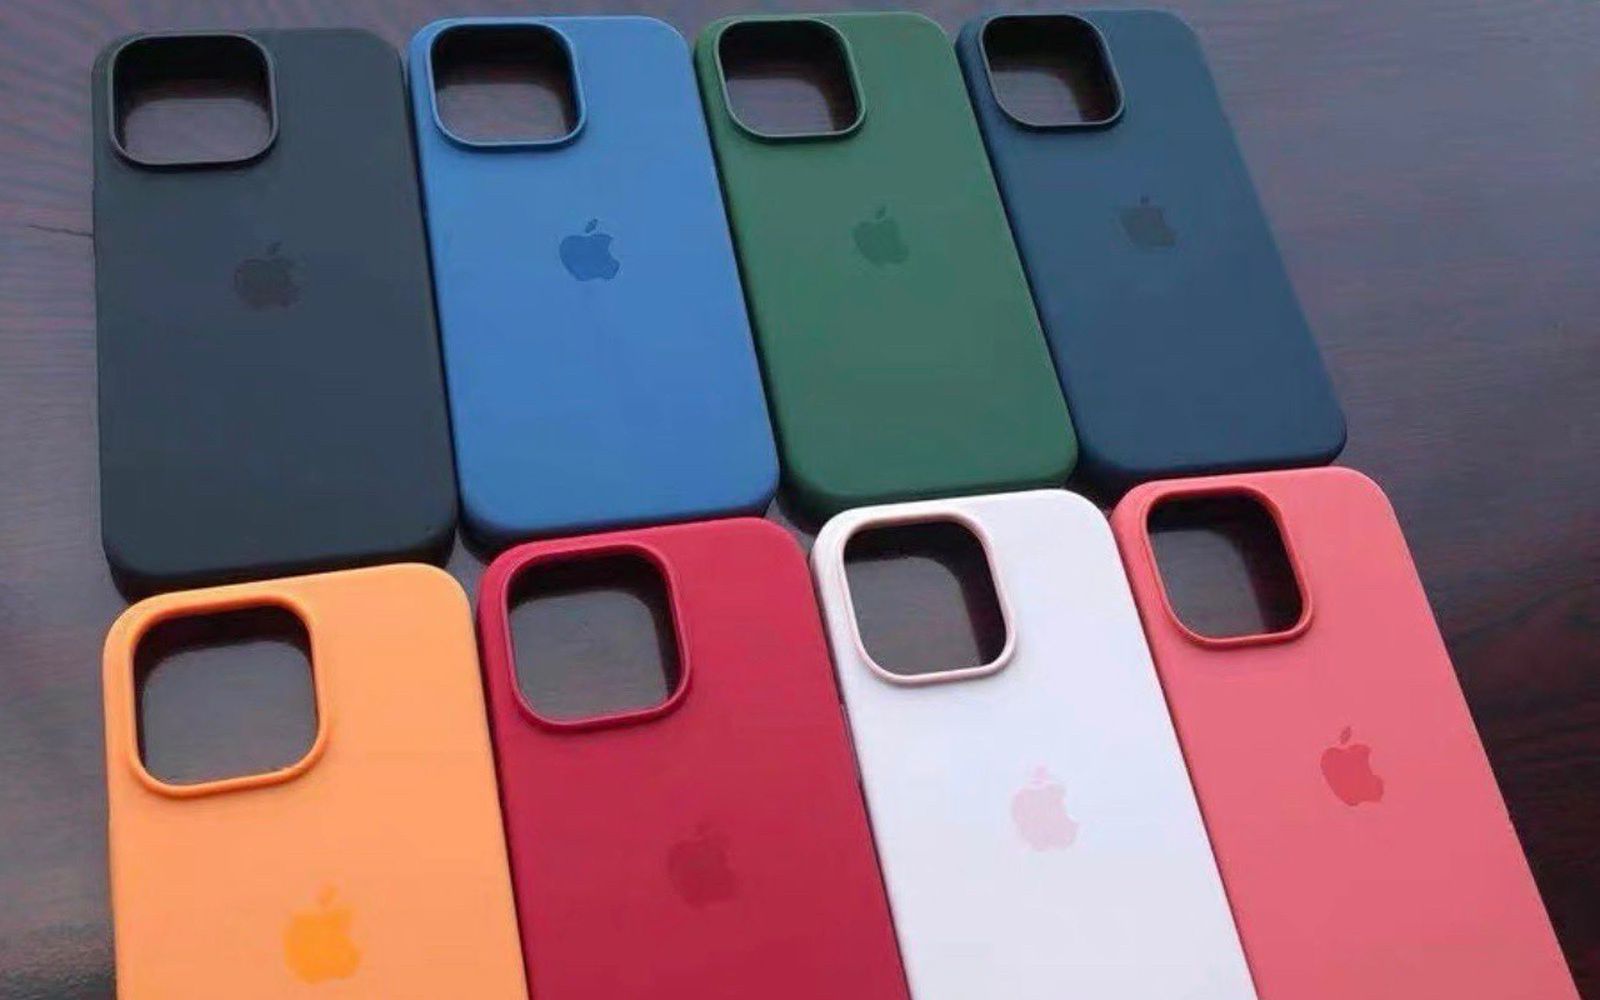 Images Allegedly Show New iPhone 13 Case Colors Ahead of Apple